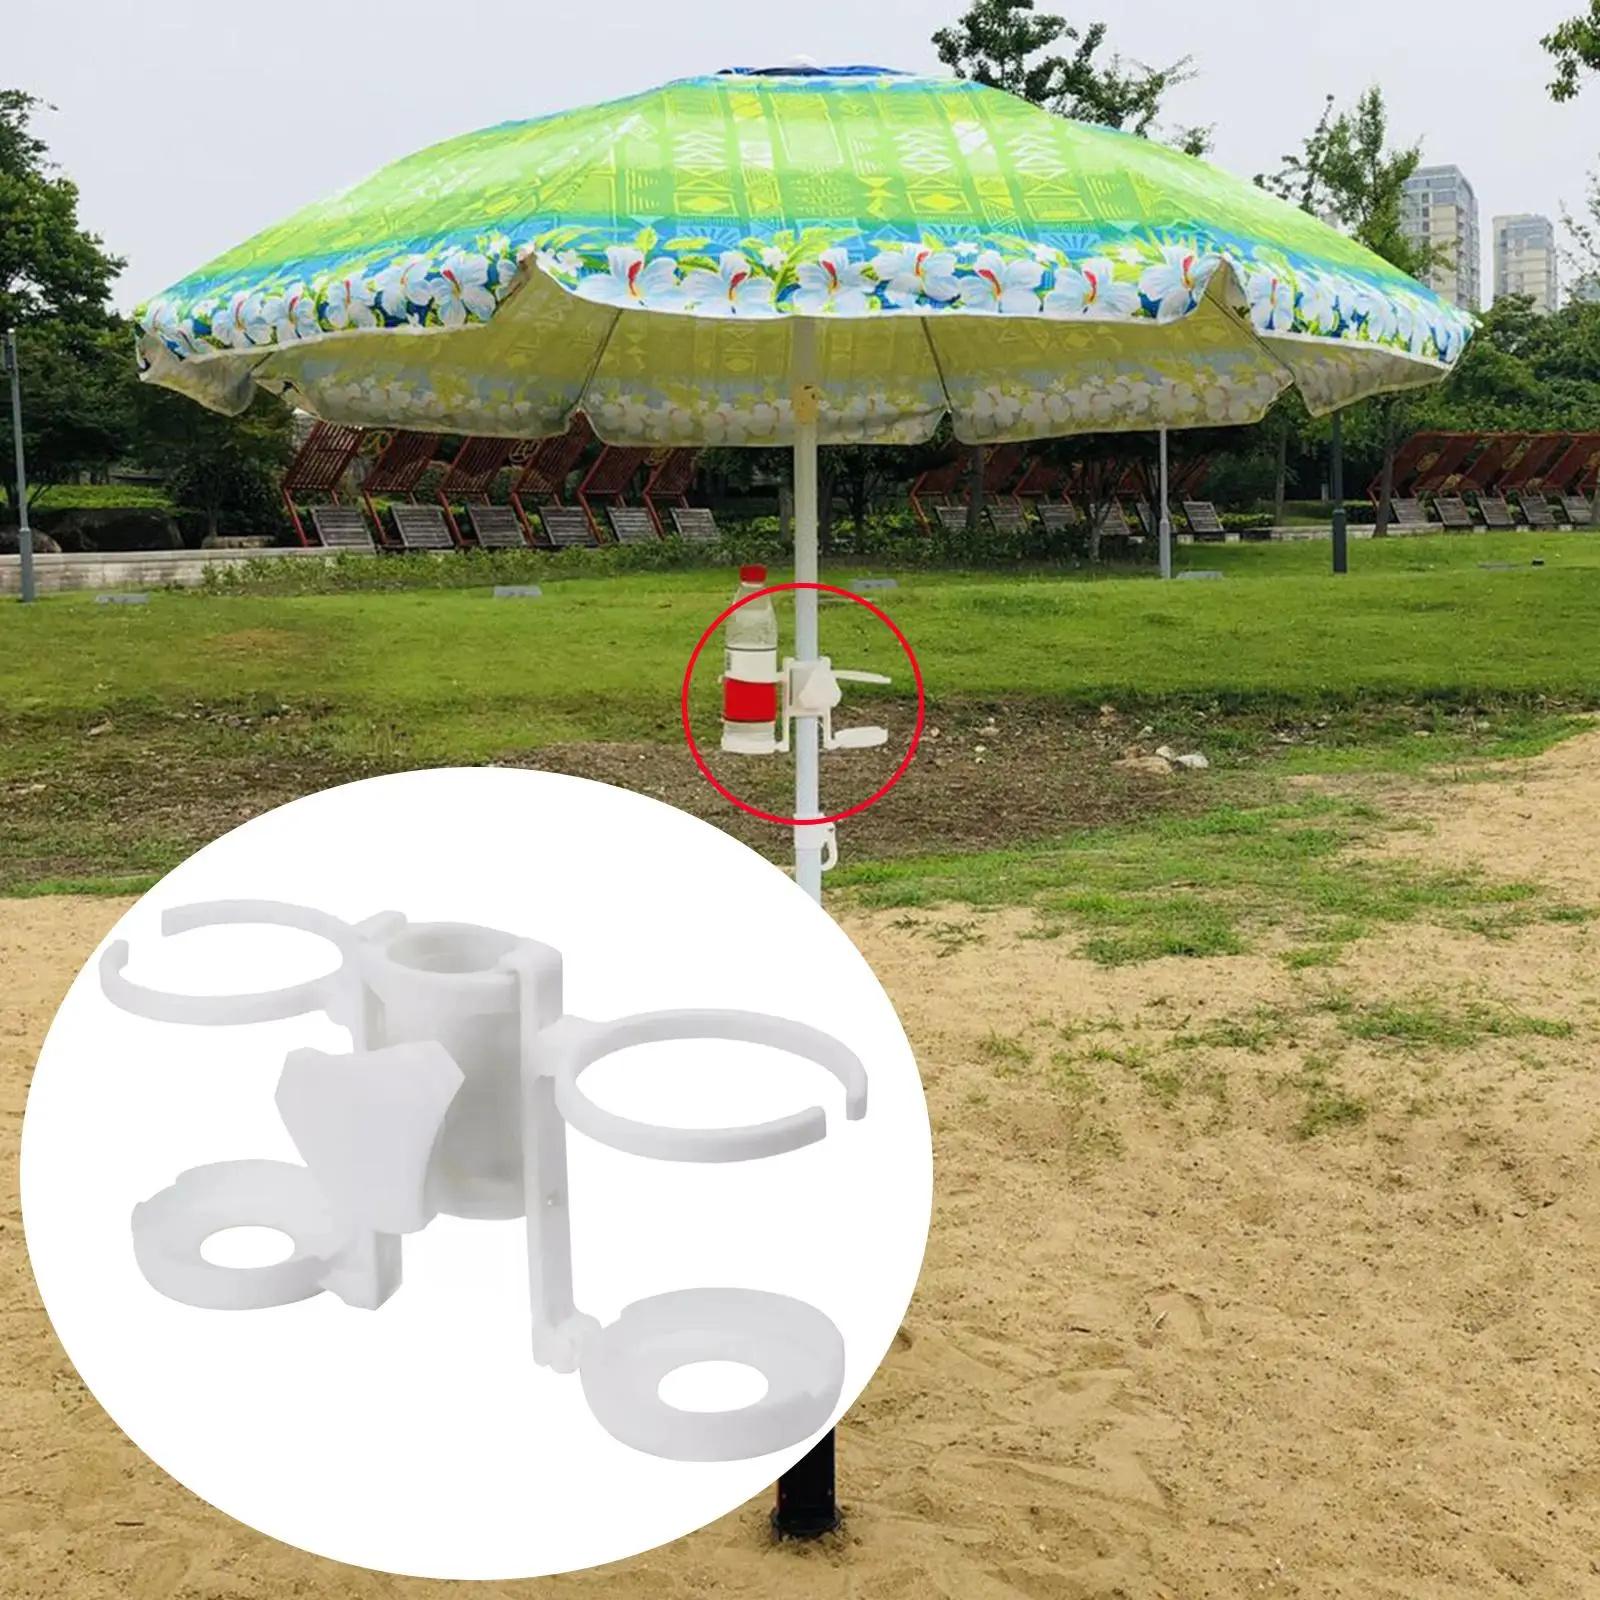 Outdoor Beach Umbrella Cup Holder Portable W/ 2 Drink Holders Drink Beach Garden Swimming Pool Coffee Stand for Umbrella Patio